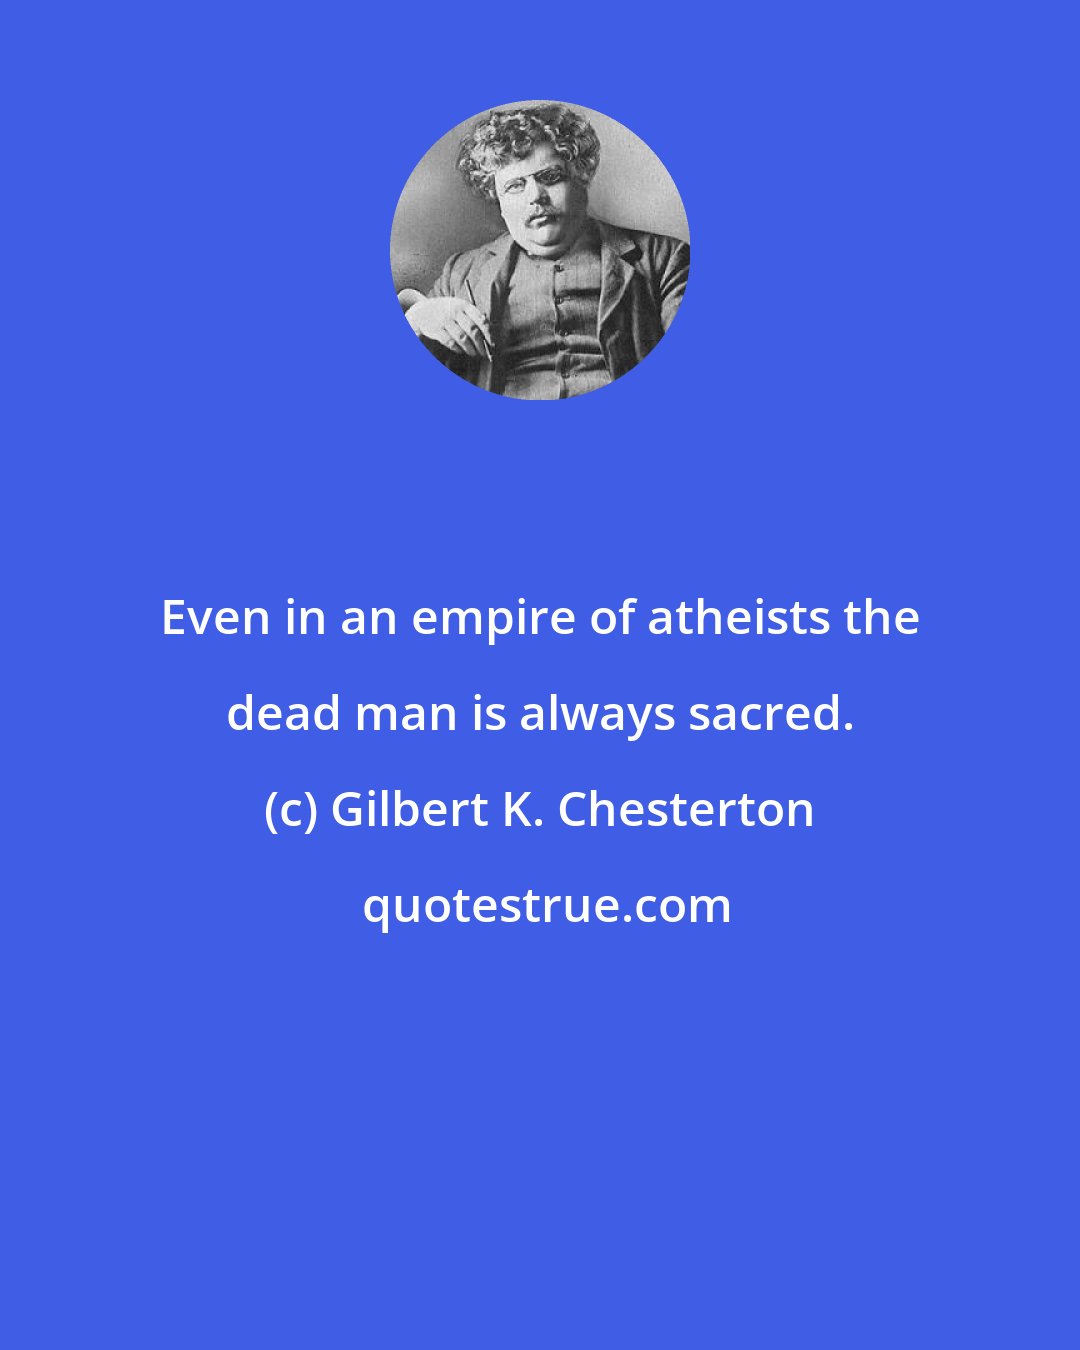 Gilbert K. Chesterton: Even in an empire of atheists the dead man is always sacred.